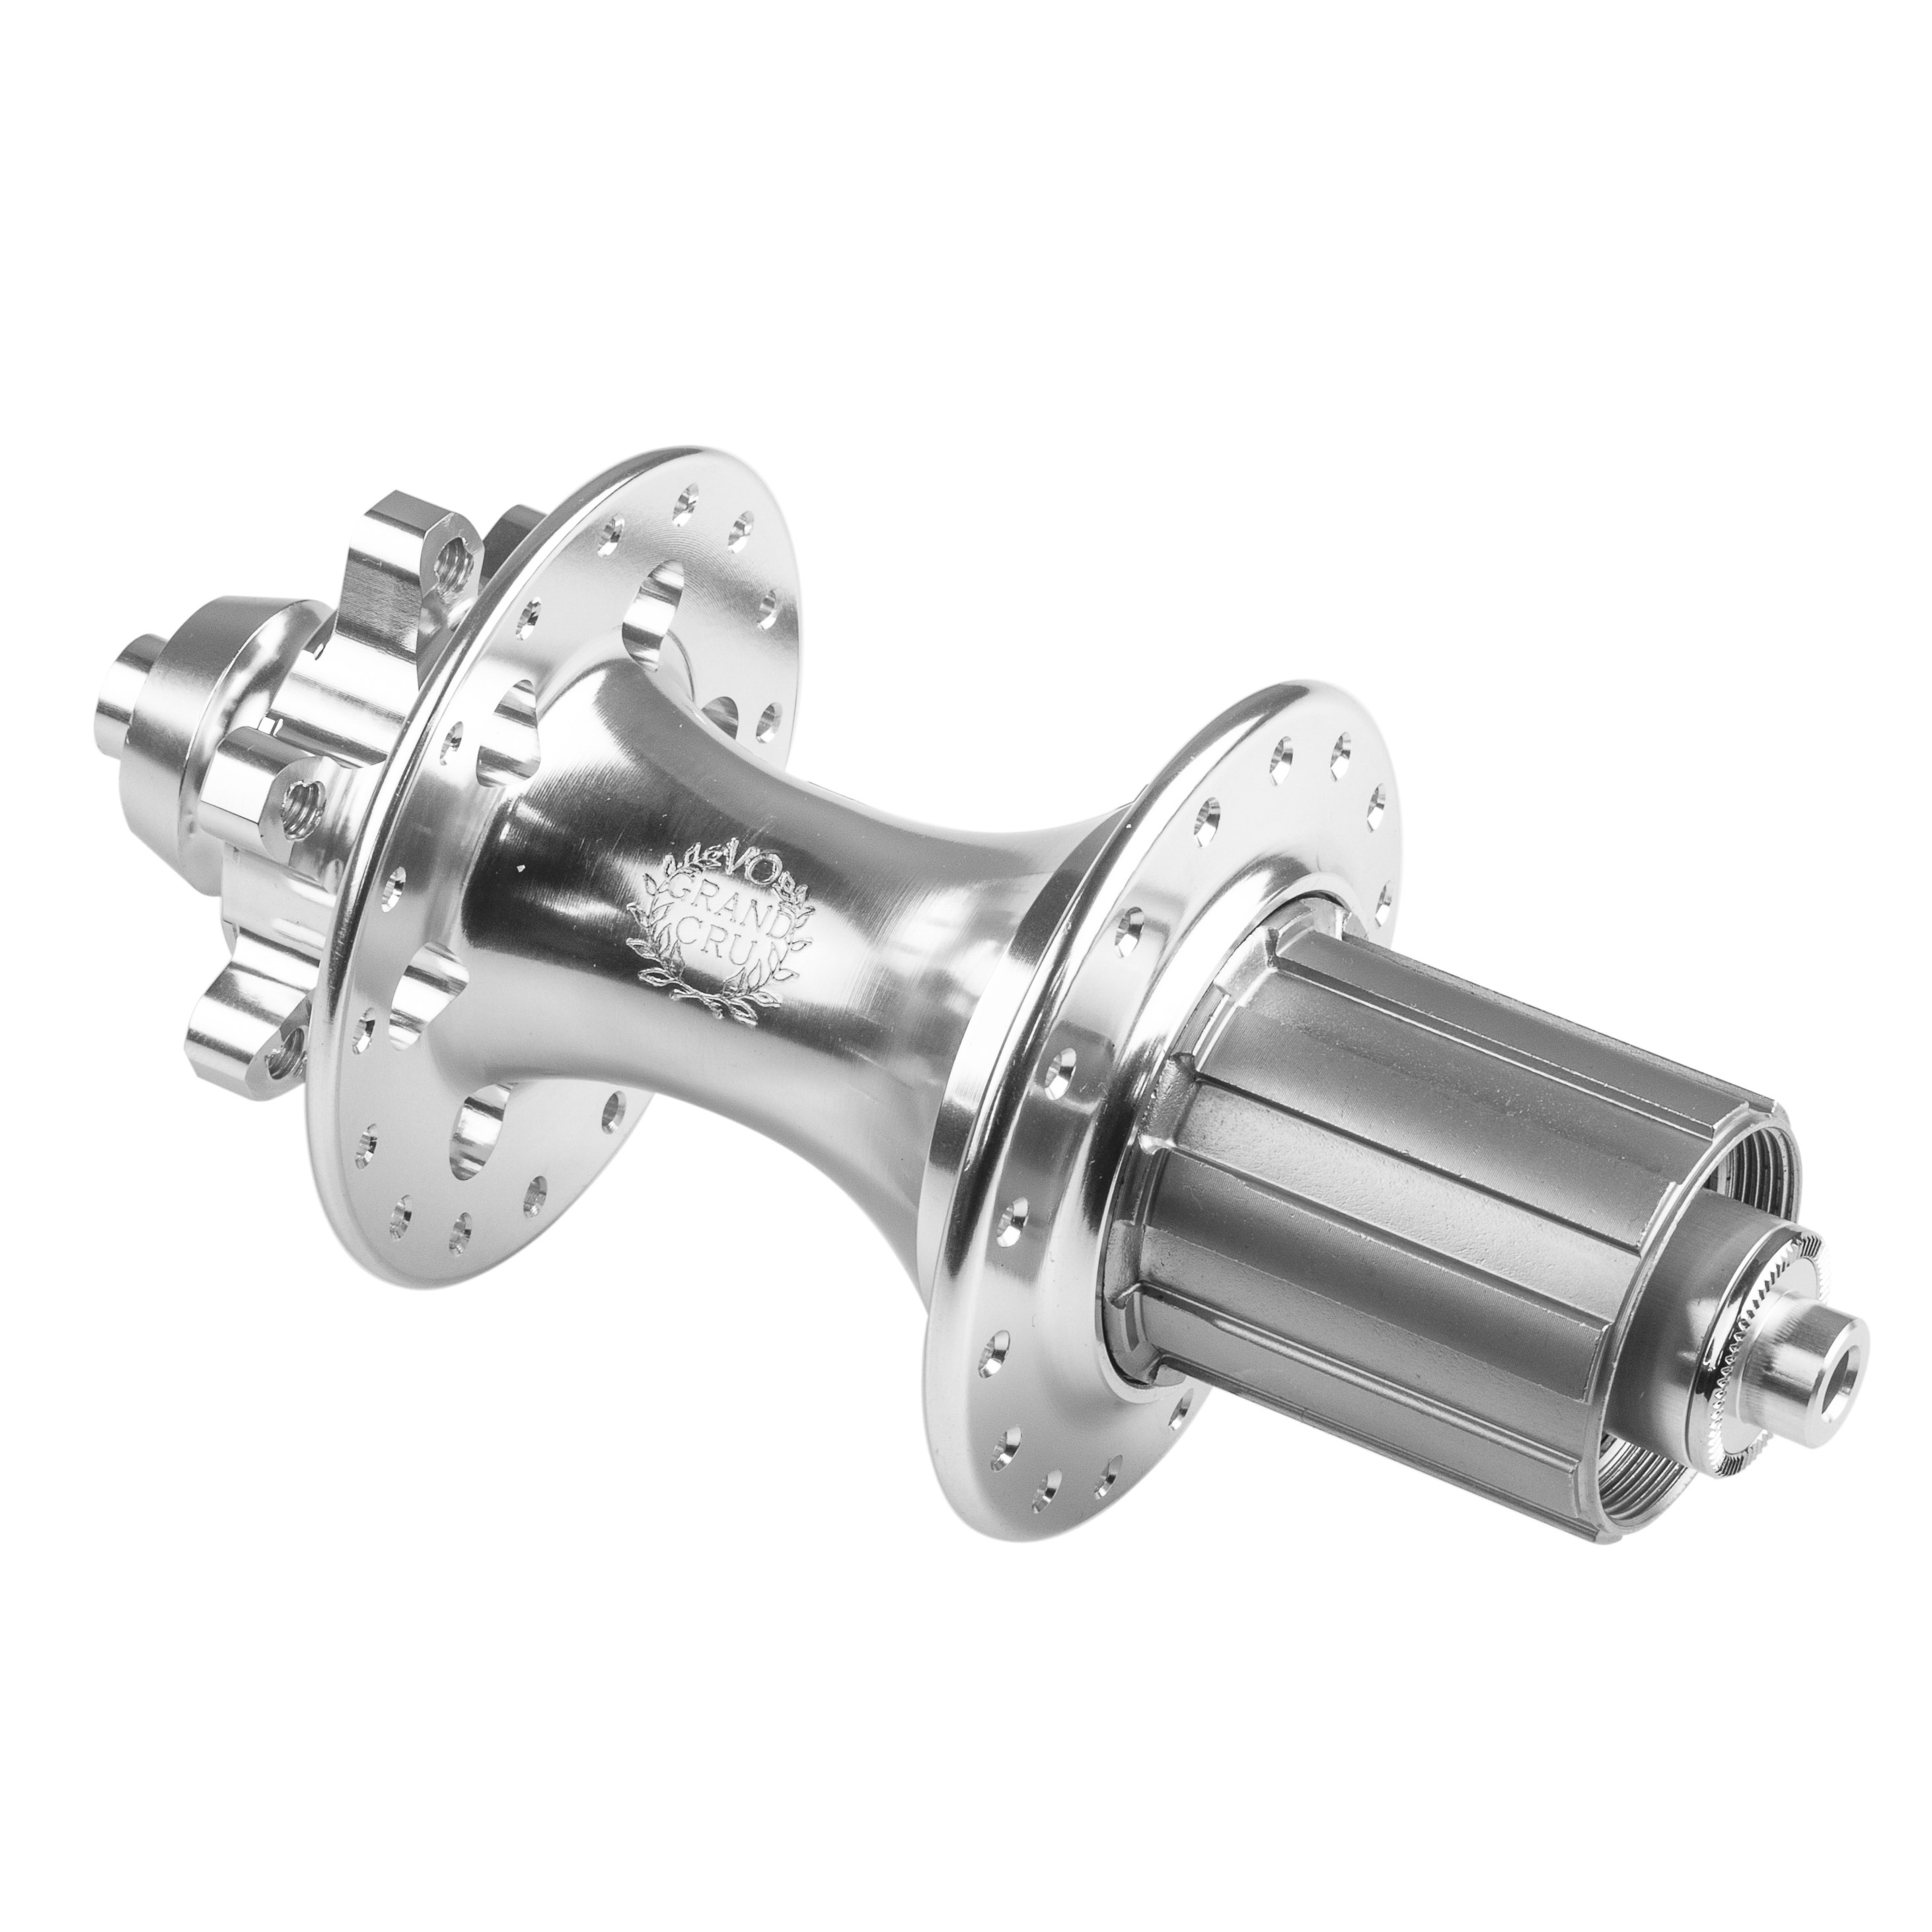 Velo Orange adds 11-speed field-serviceable touring hubs - Disc%20hub%20Ds